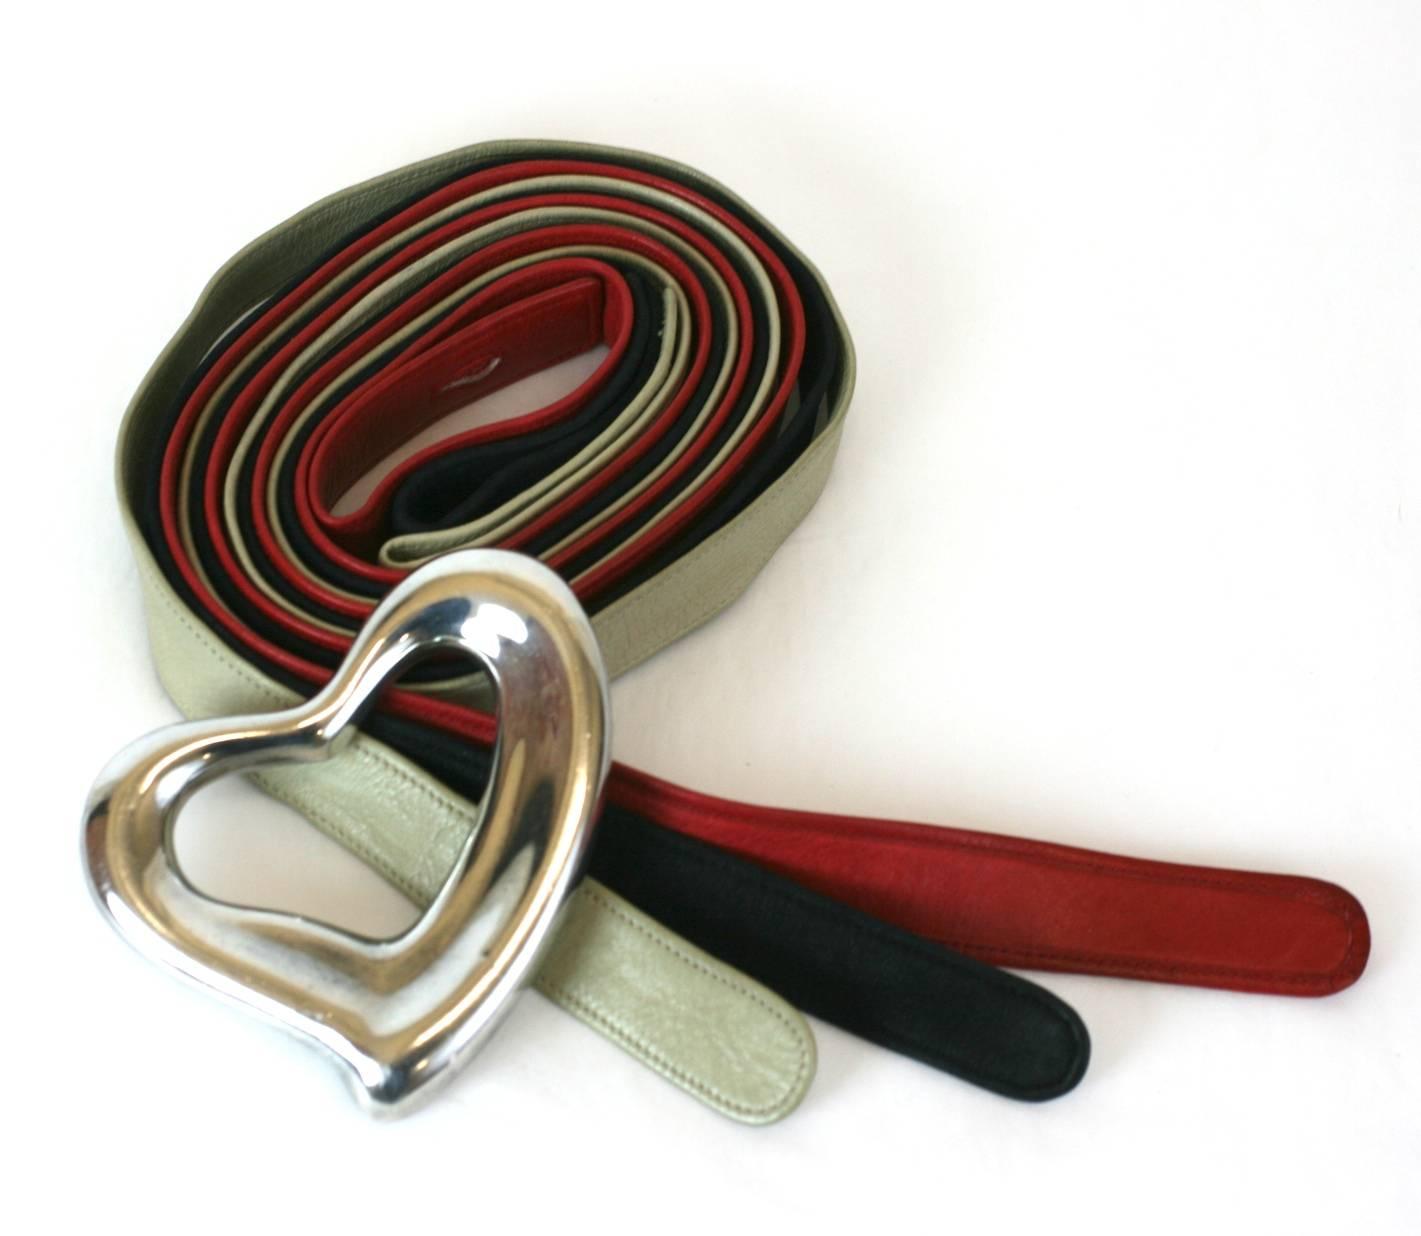 Elsa Peretti's iconic Heart Belt suite for Tiffany and Co. with an assortment of rare interchangeable leather belts in Halston's favorite ivory, black and red tones. Large scale sterling heart buckle made in Spain for Tiffany in 1975. 
In the